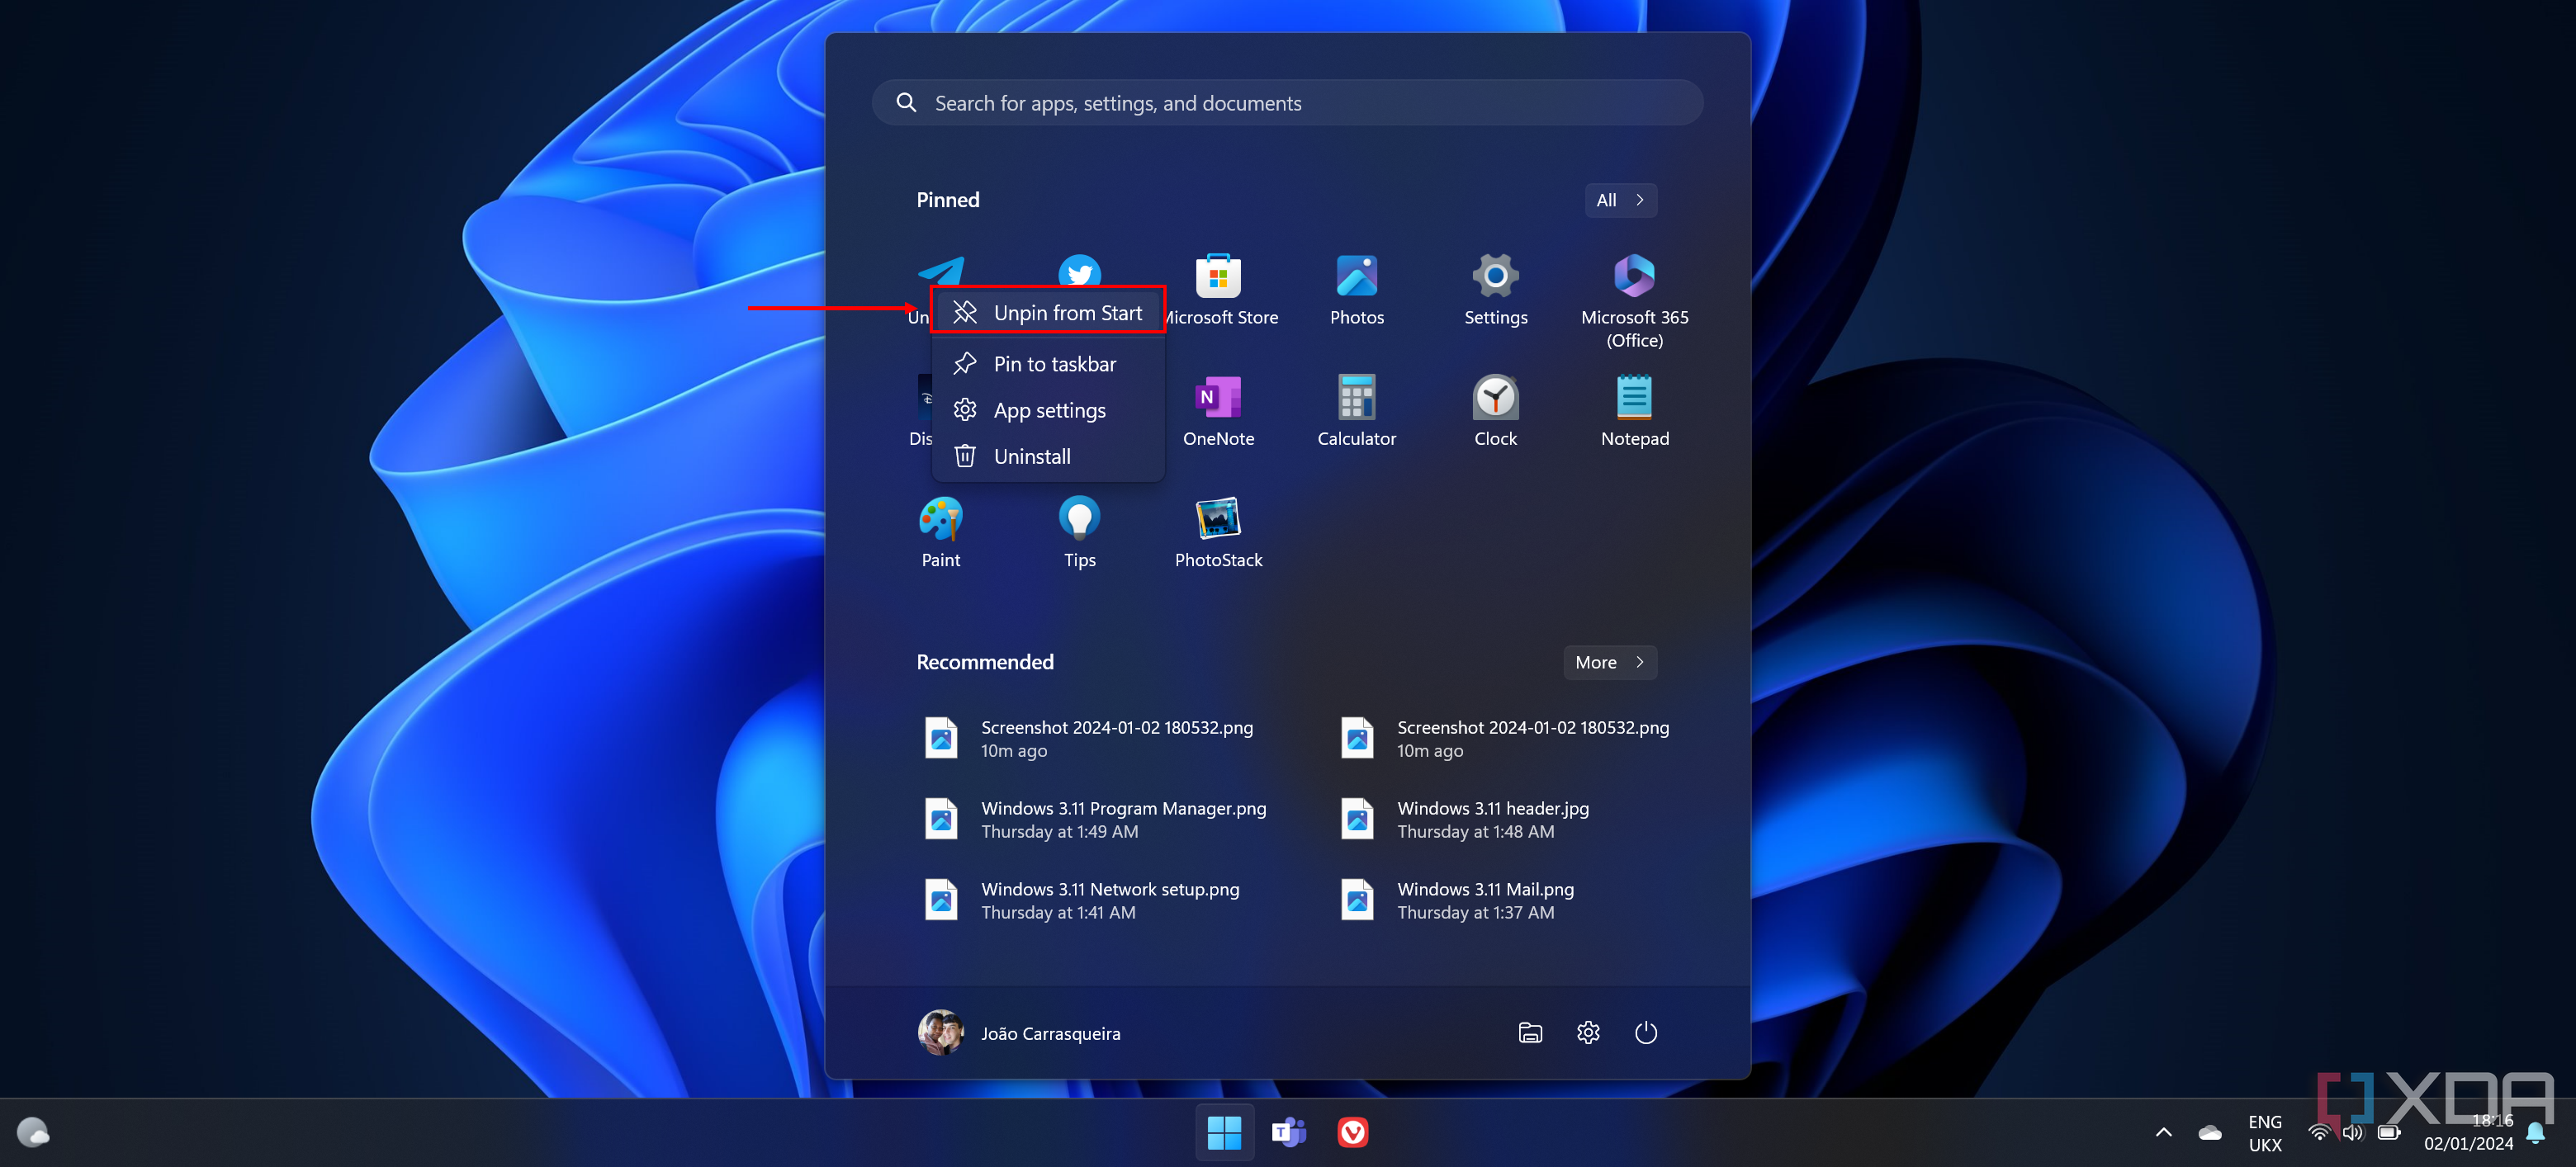 Screenshot of the Windows 11 Start menu with the Unpin from Start option highlighted